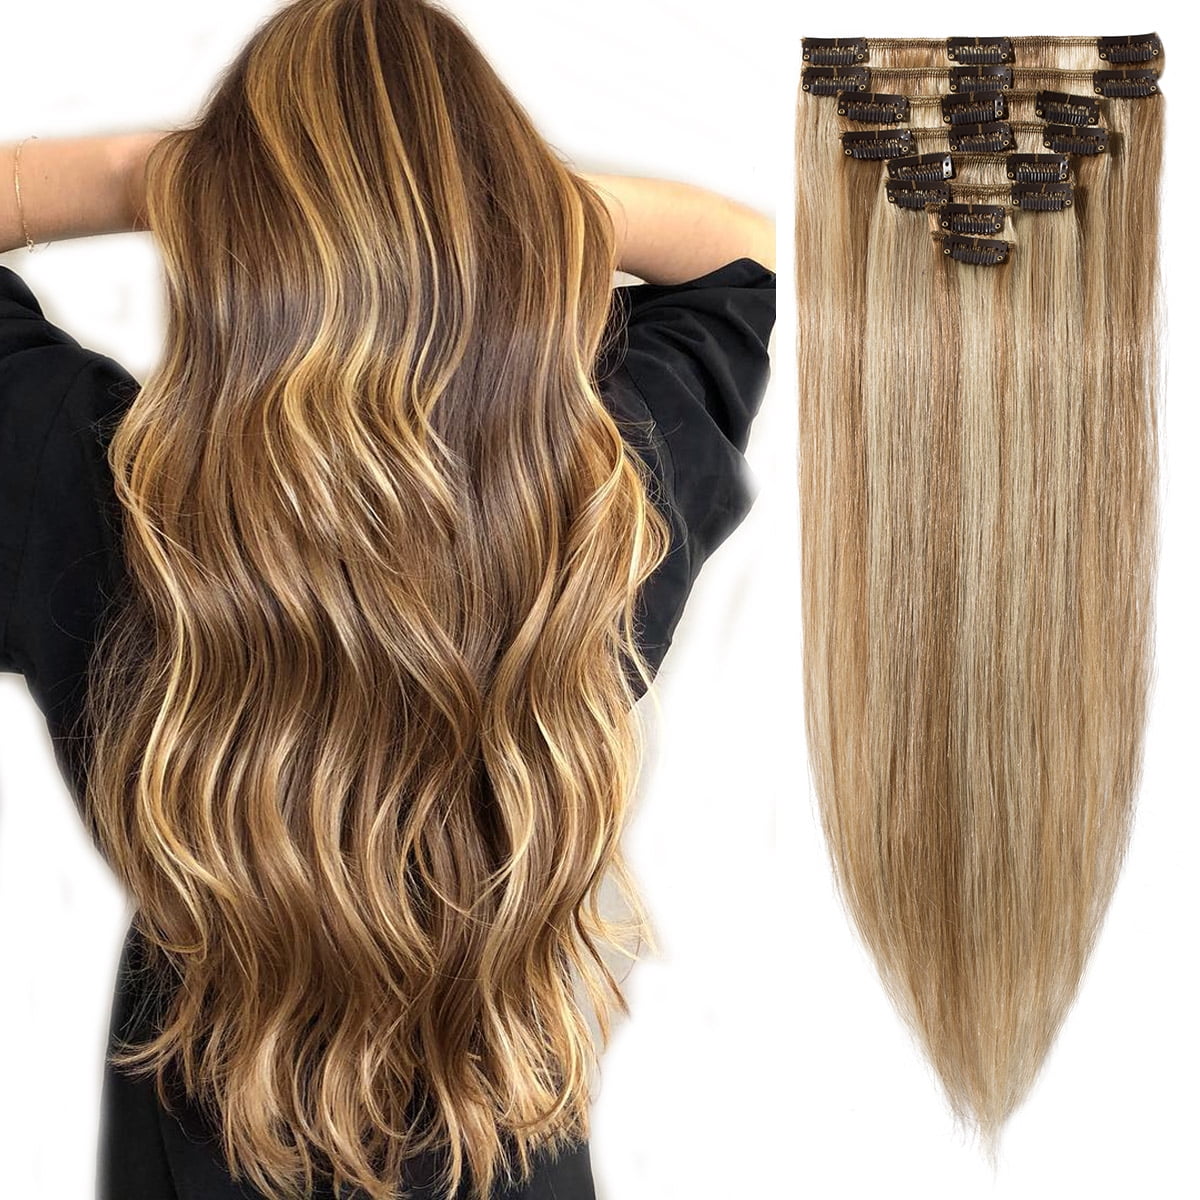 100% Clip in Real Human Hair Extensions 7Pcs/set 70g 80g 16"18"20"22"6 Colors 